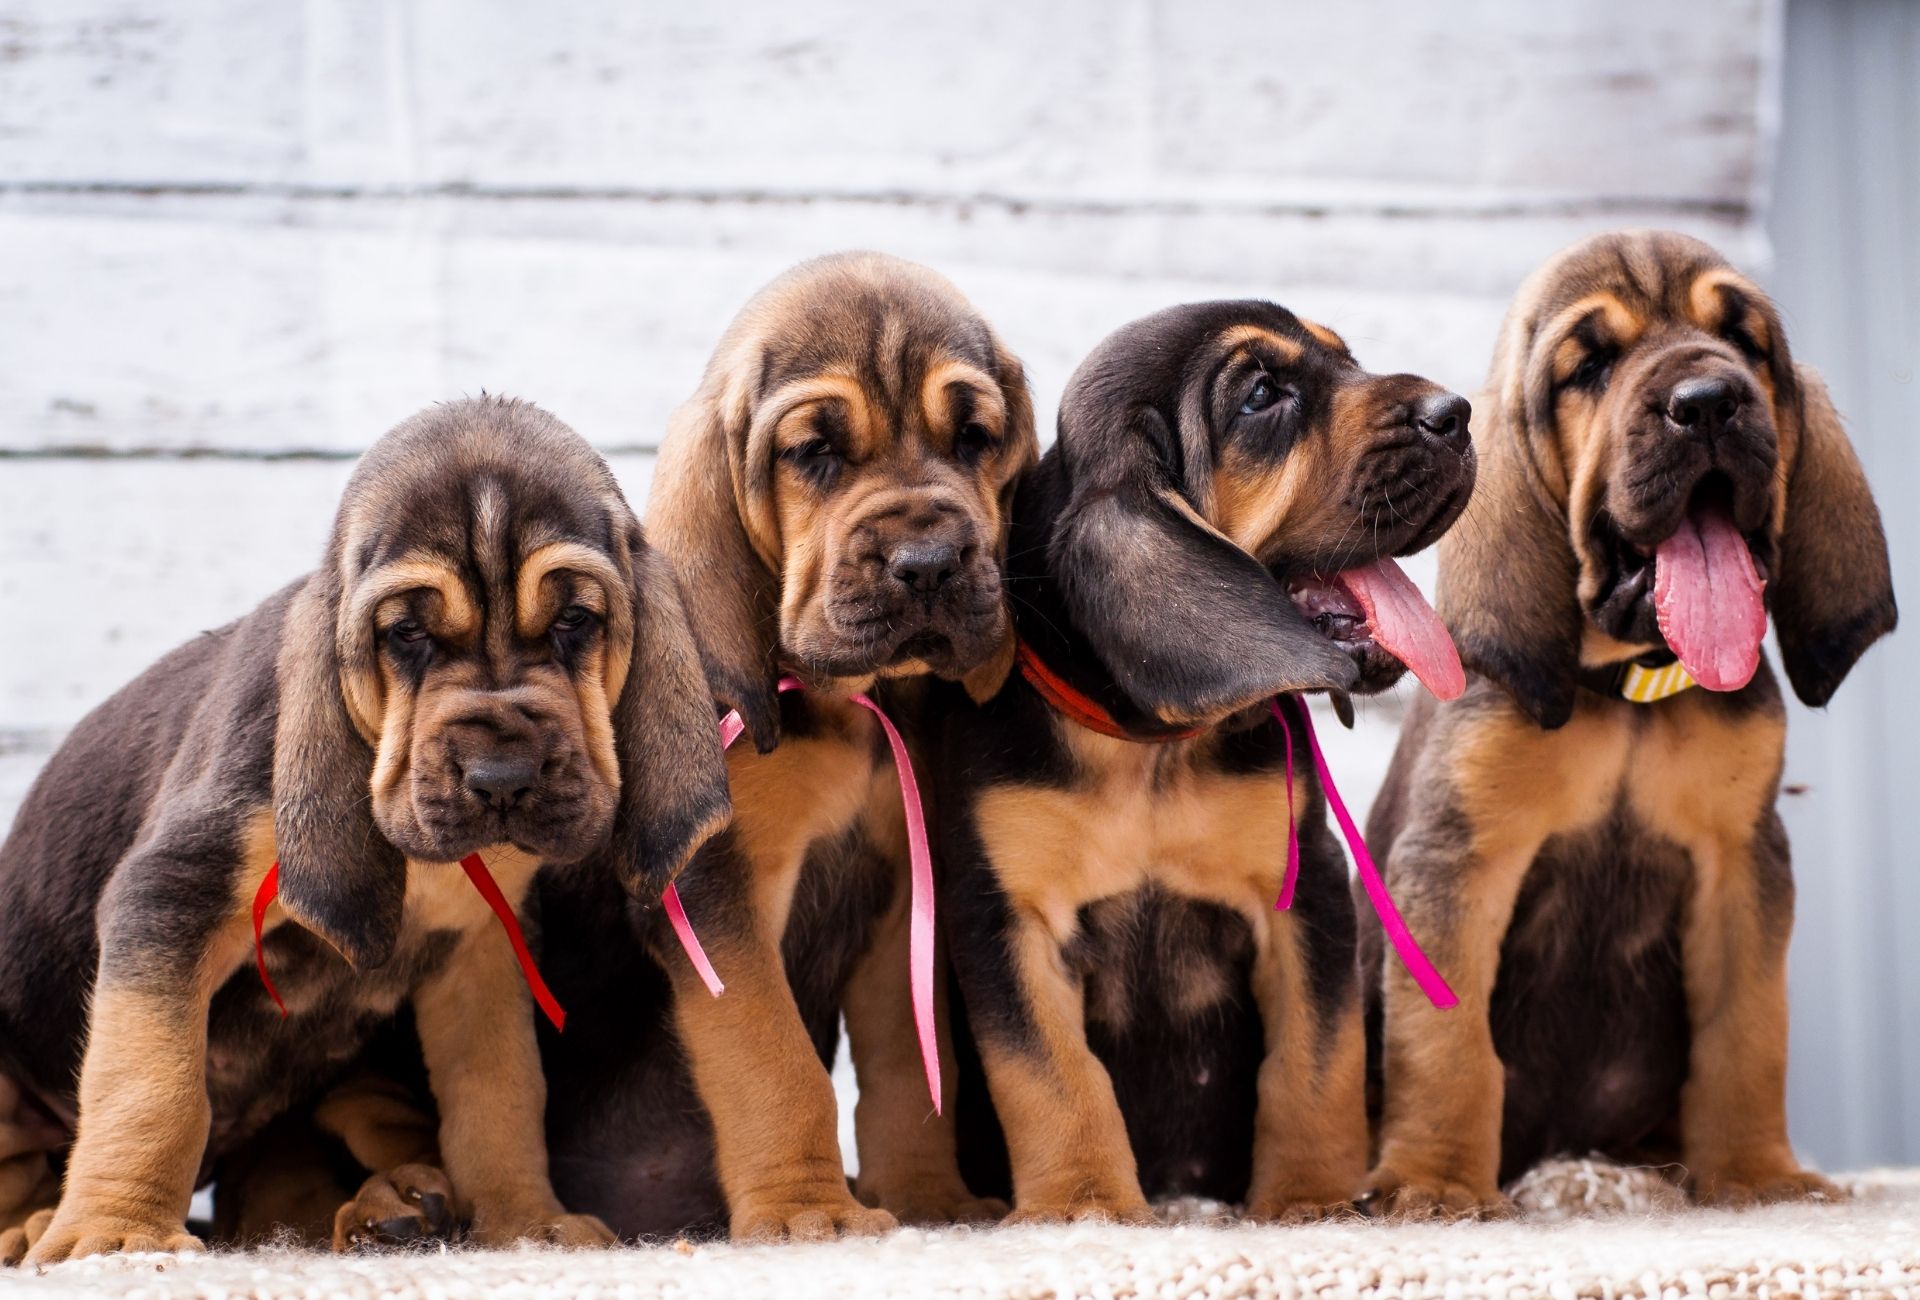 Four Bloodhound puppies with long sloppy ears. Potentially suitable for tracking down bear.